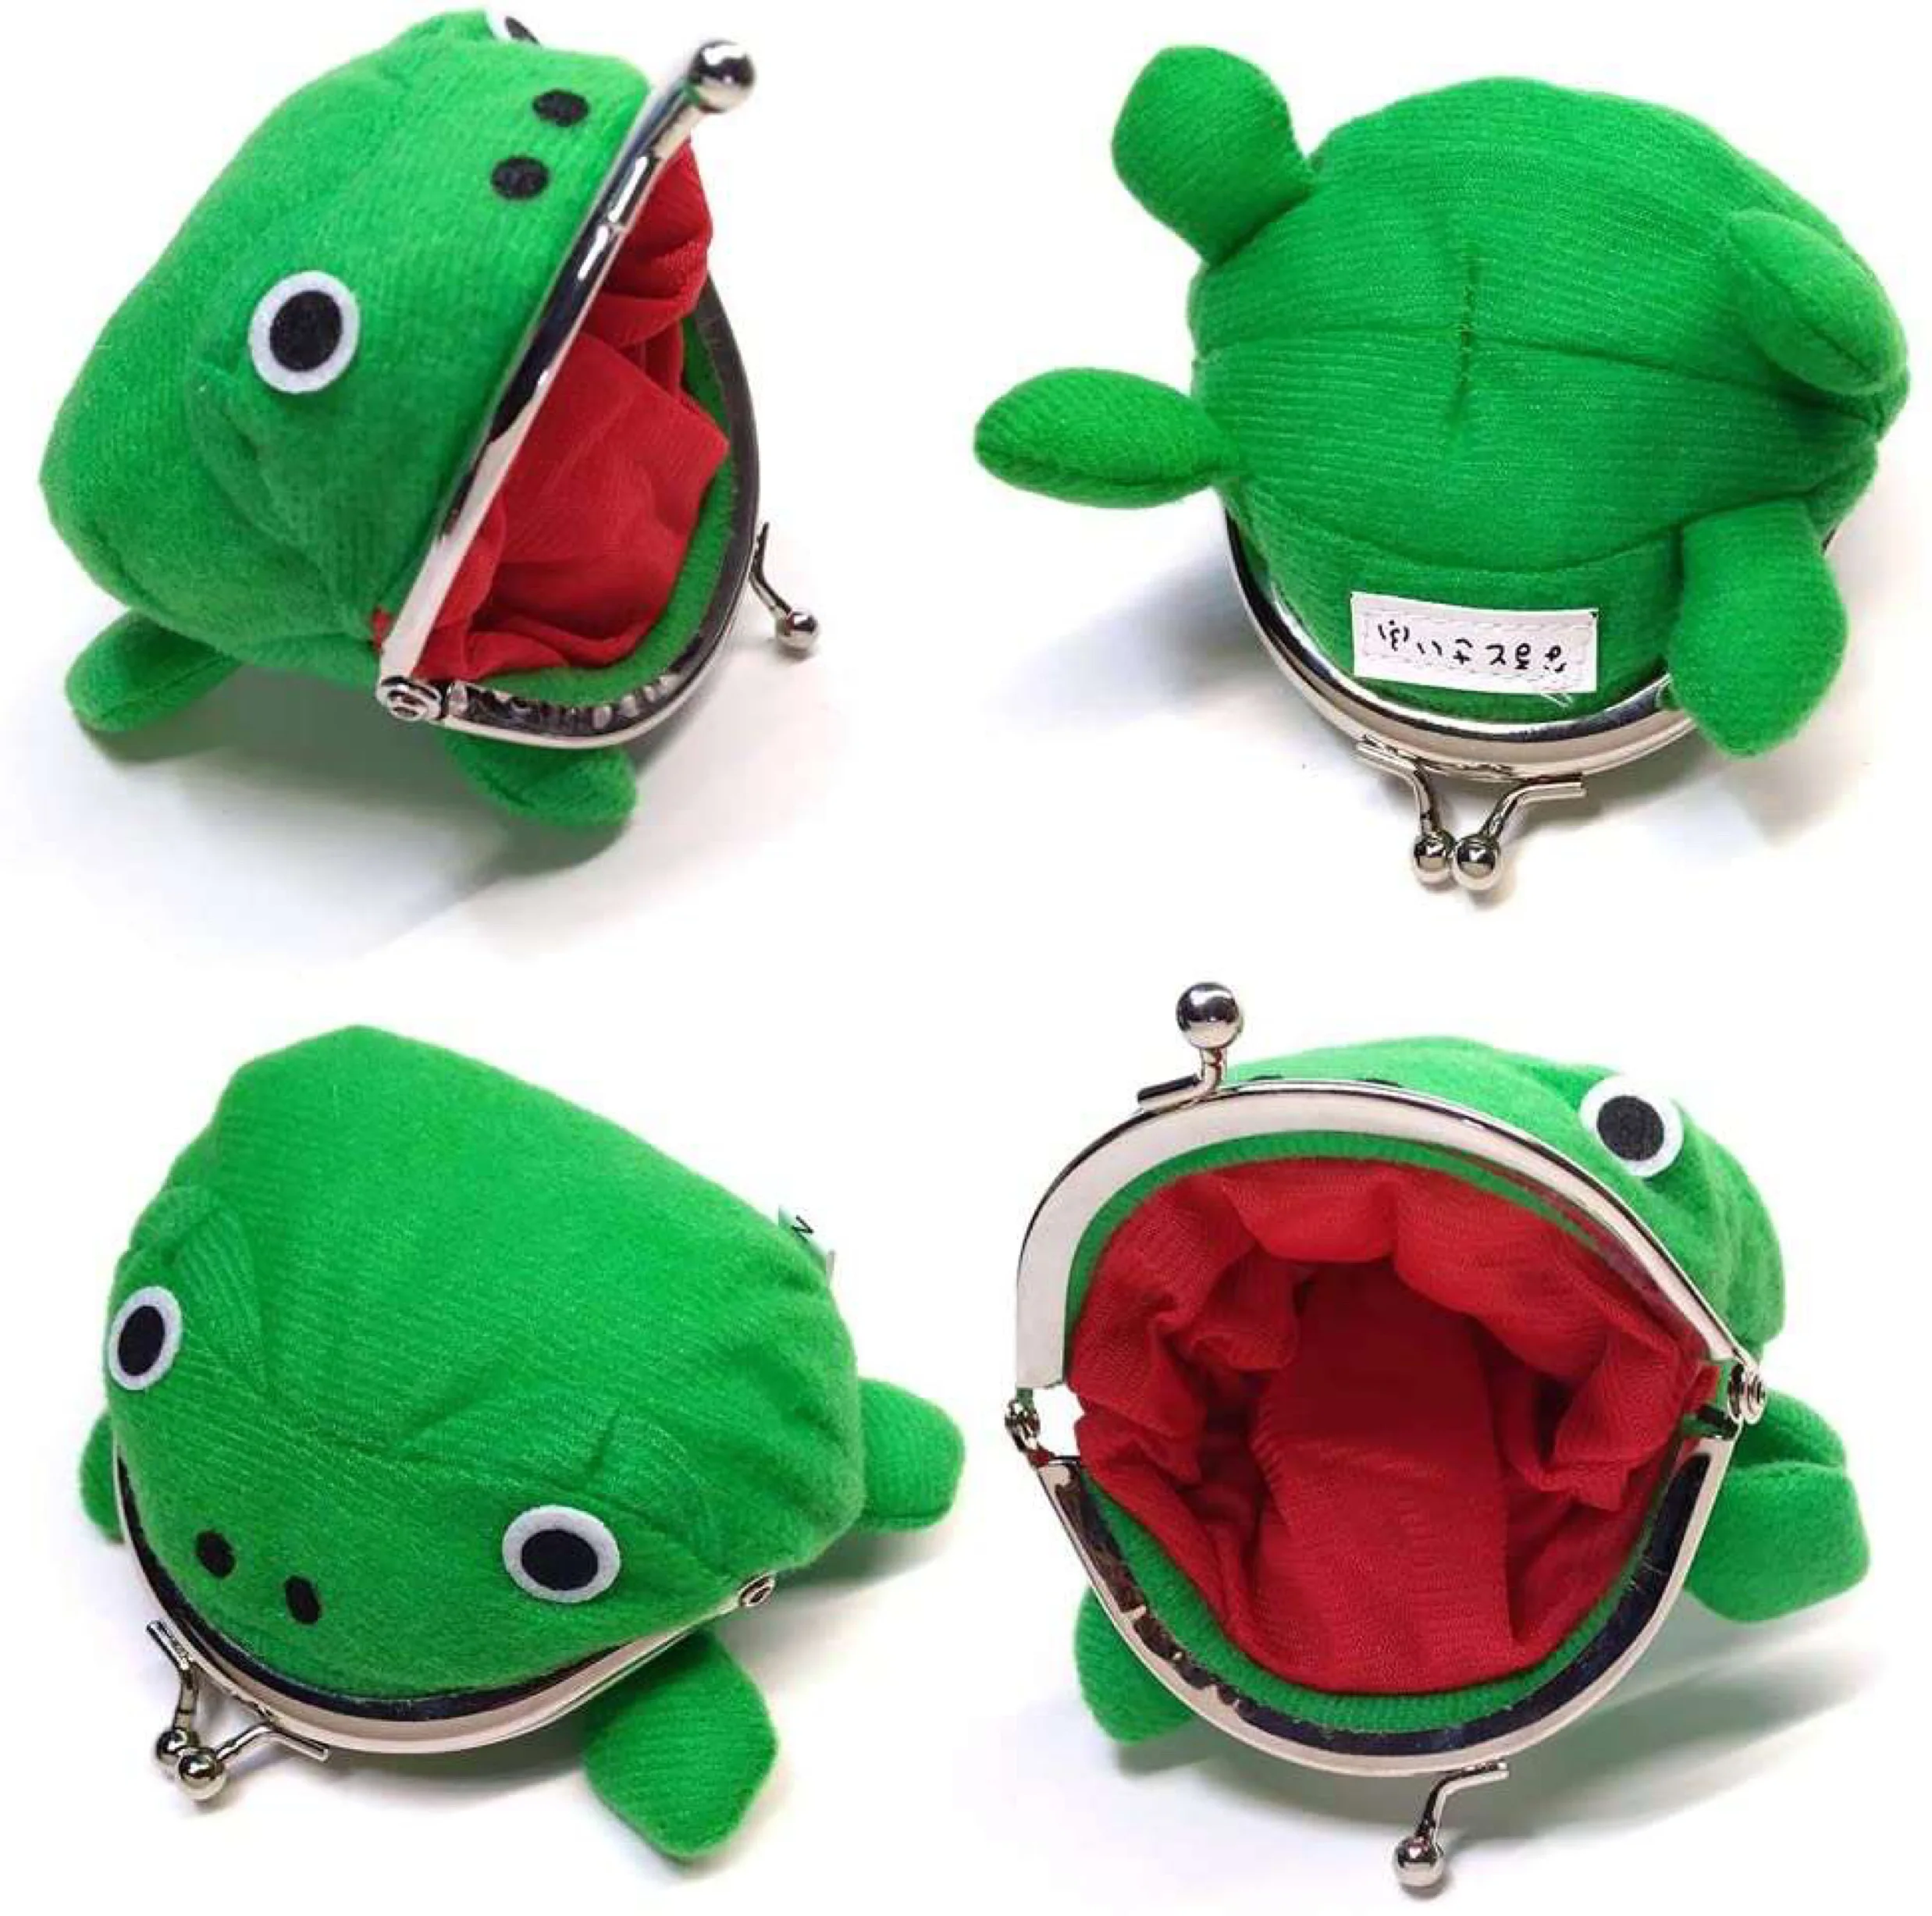 Novelty Adorable Anime Cartoon Frog Wallet Coin Purse Key Chain Cute Plush Frog  Cartoon Cosplay Purse For Women Bag Accessories - Buy Anime Frog Wallet,Anime  Frog Purse,Frog Wallet Product on 